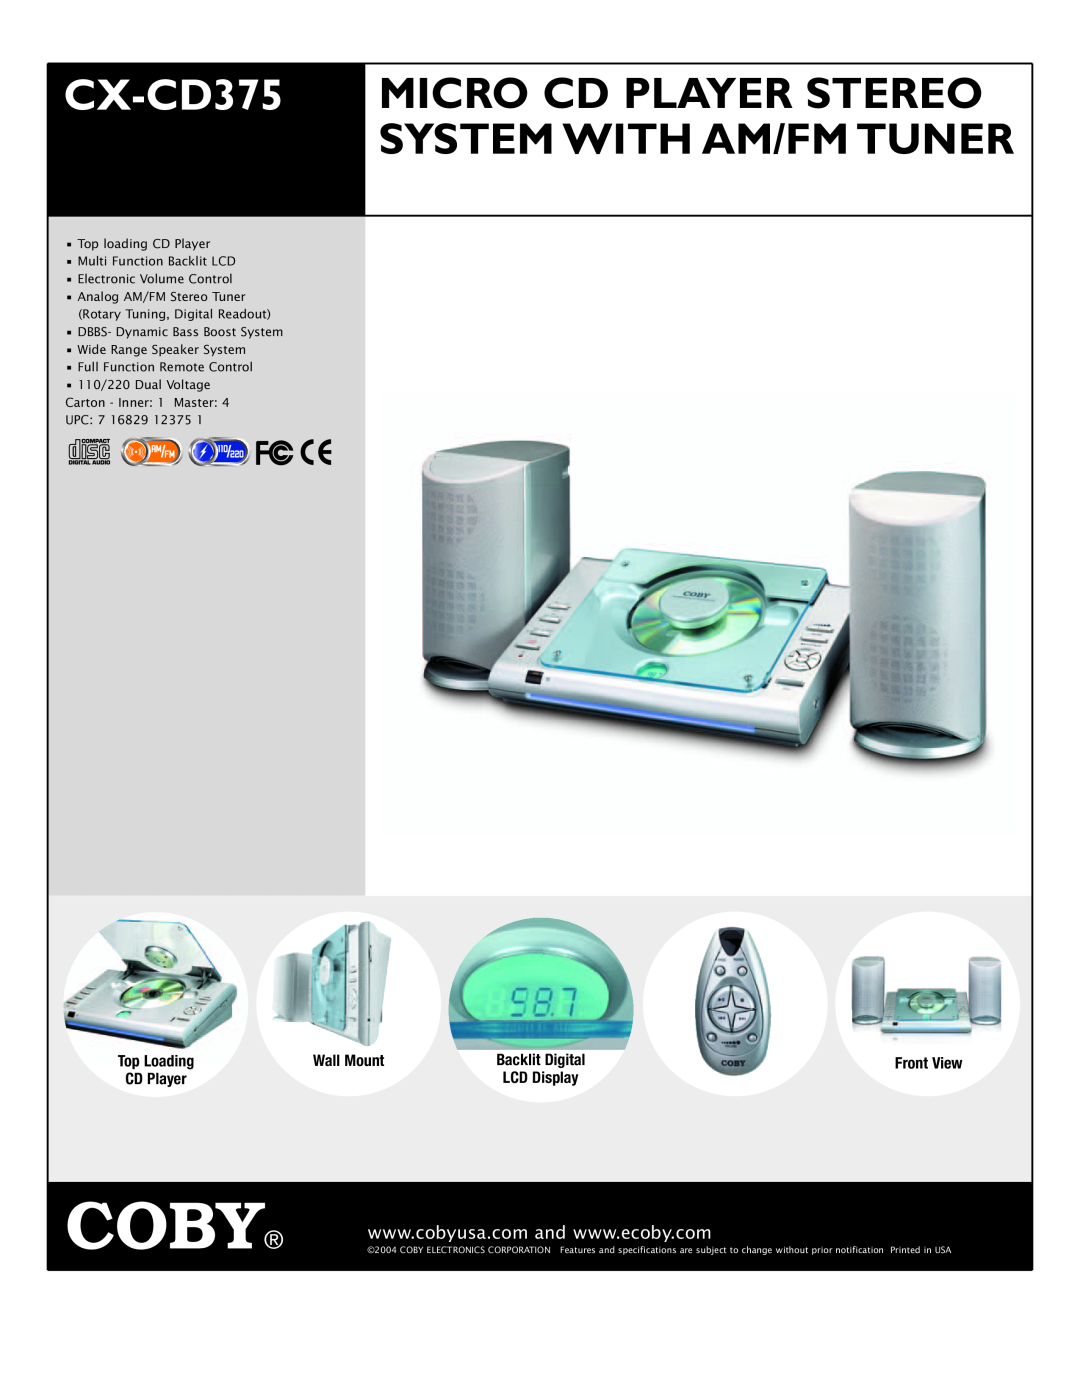 COBY electronic CX-CD375 specifications Coby, Micro Cd Player Stereo, System With Am/Fm Tuner, Top Loading, Wall Mount 